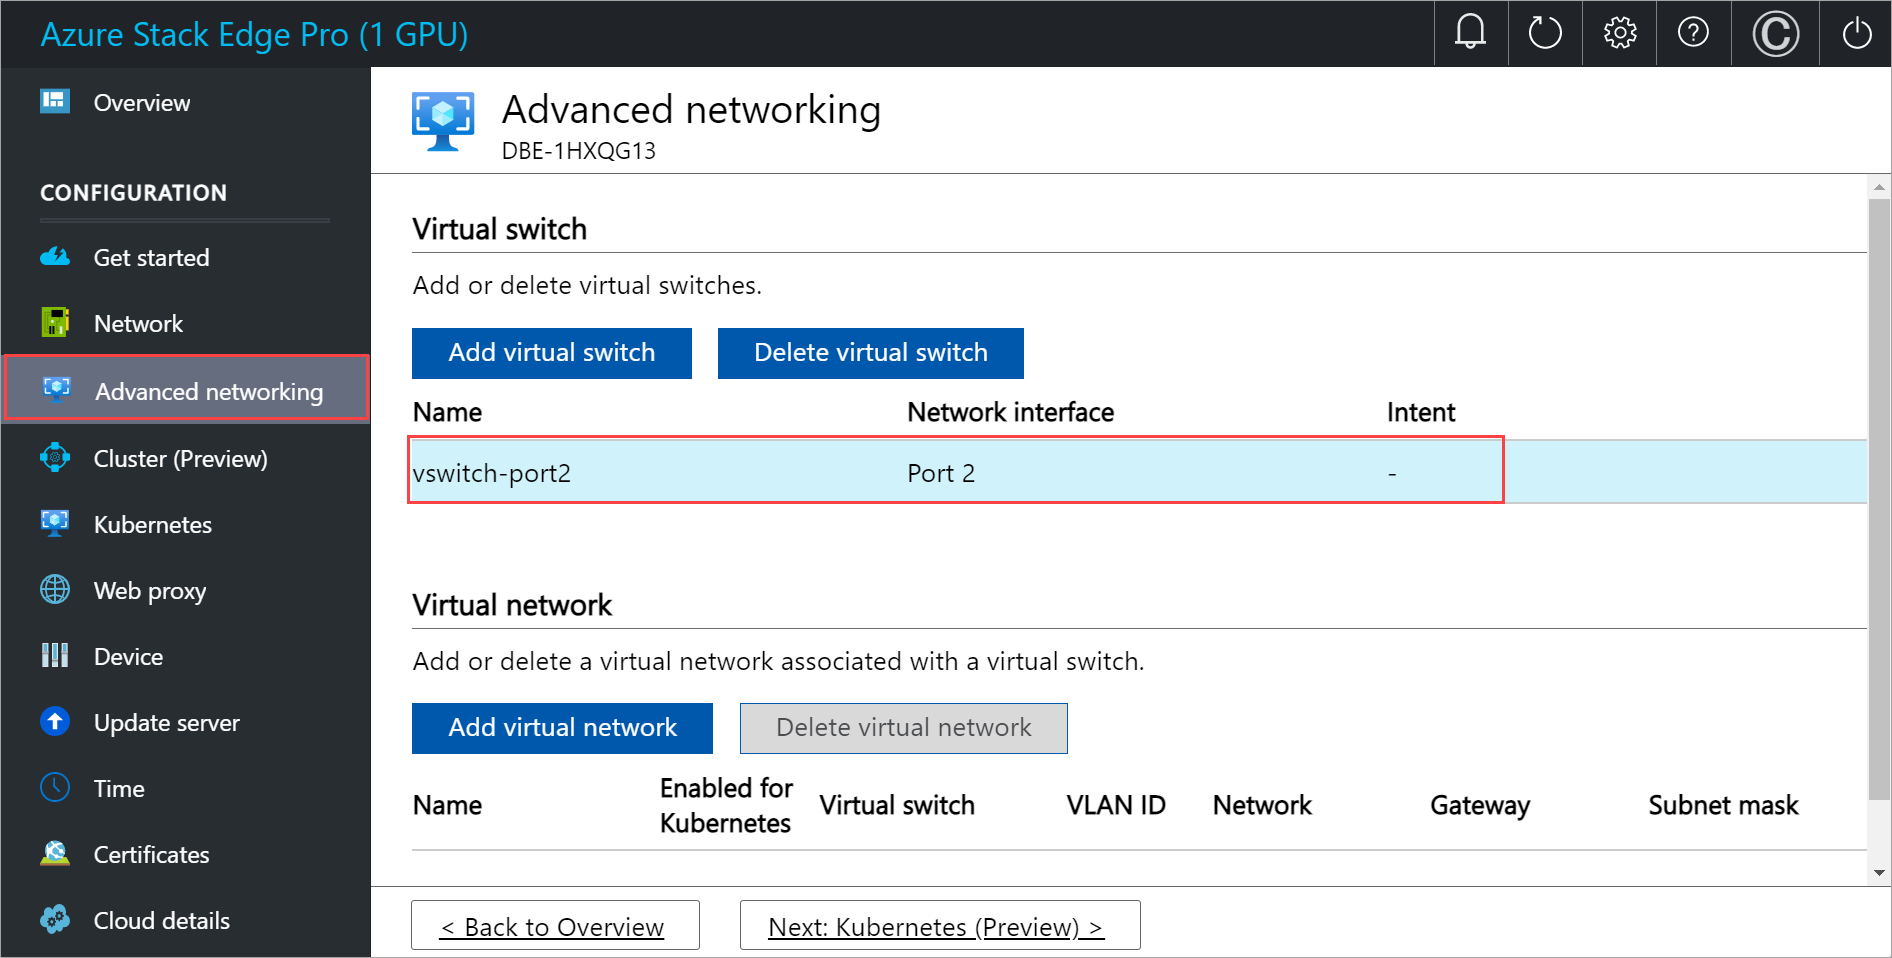 Screenshot of the Configure compute page in Advanced networking in local UI 3